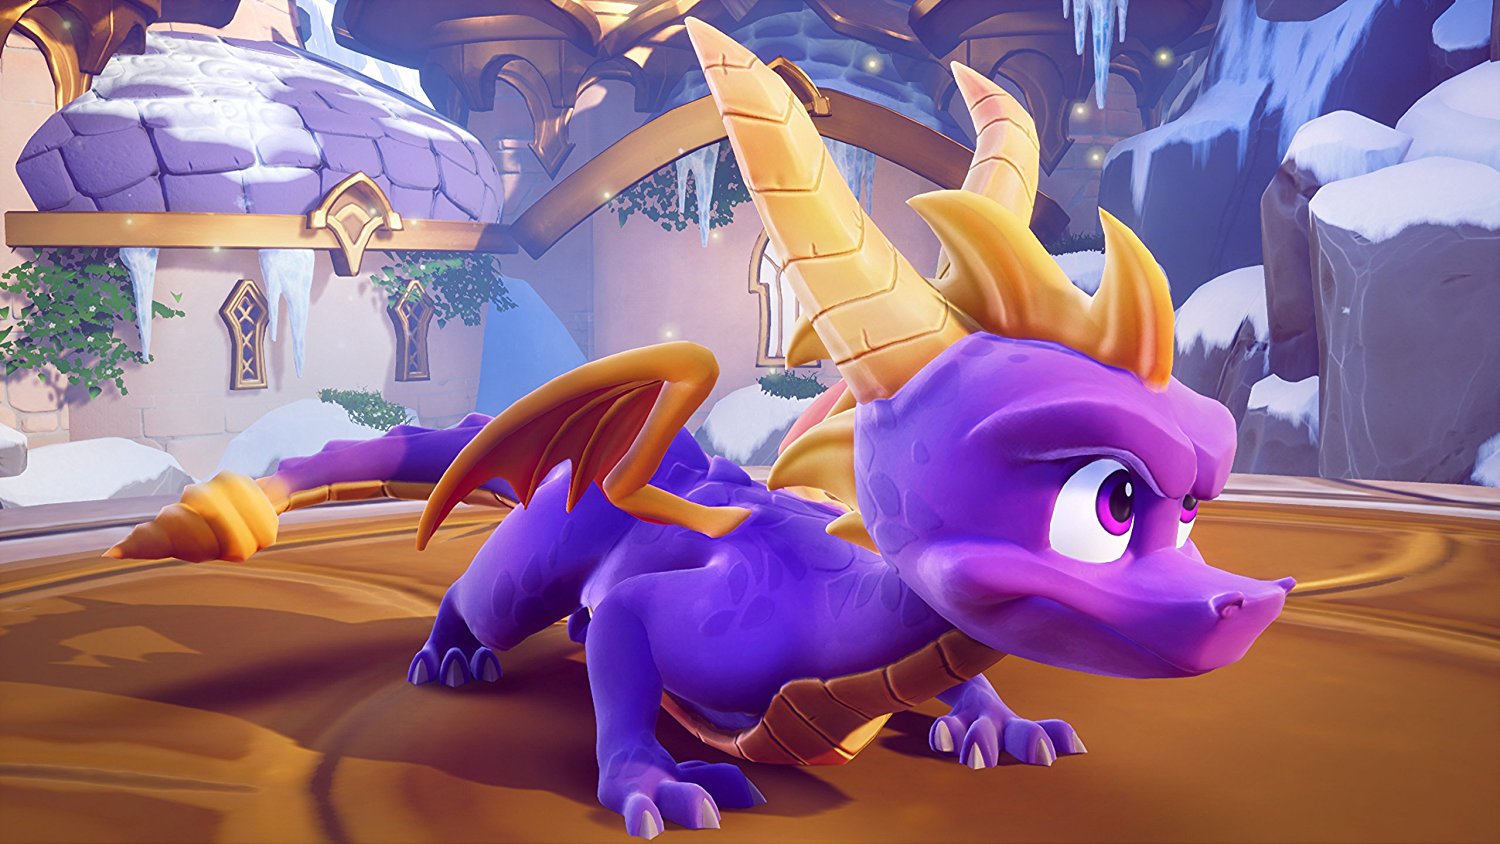 Spyro Reignited Trilogy appears rated for PC. Developed by Iron Galaxy